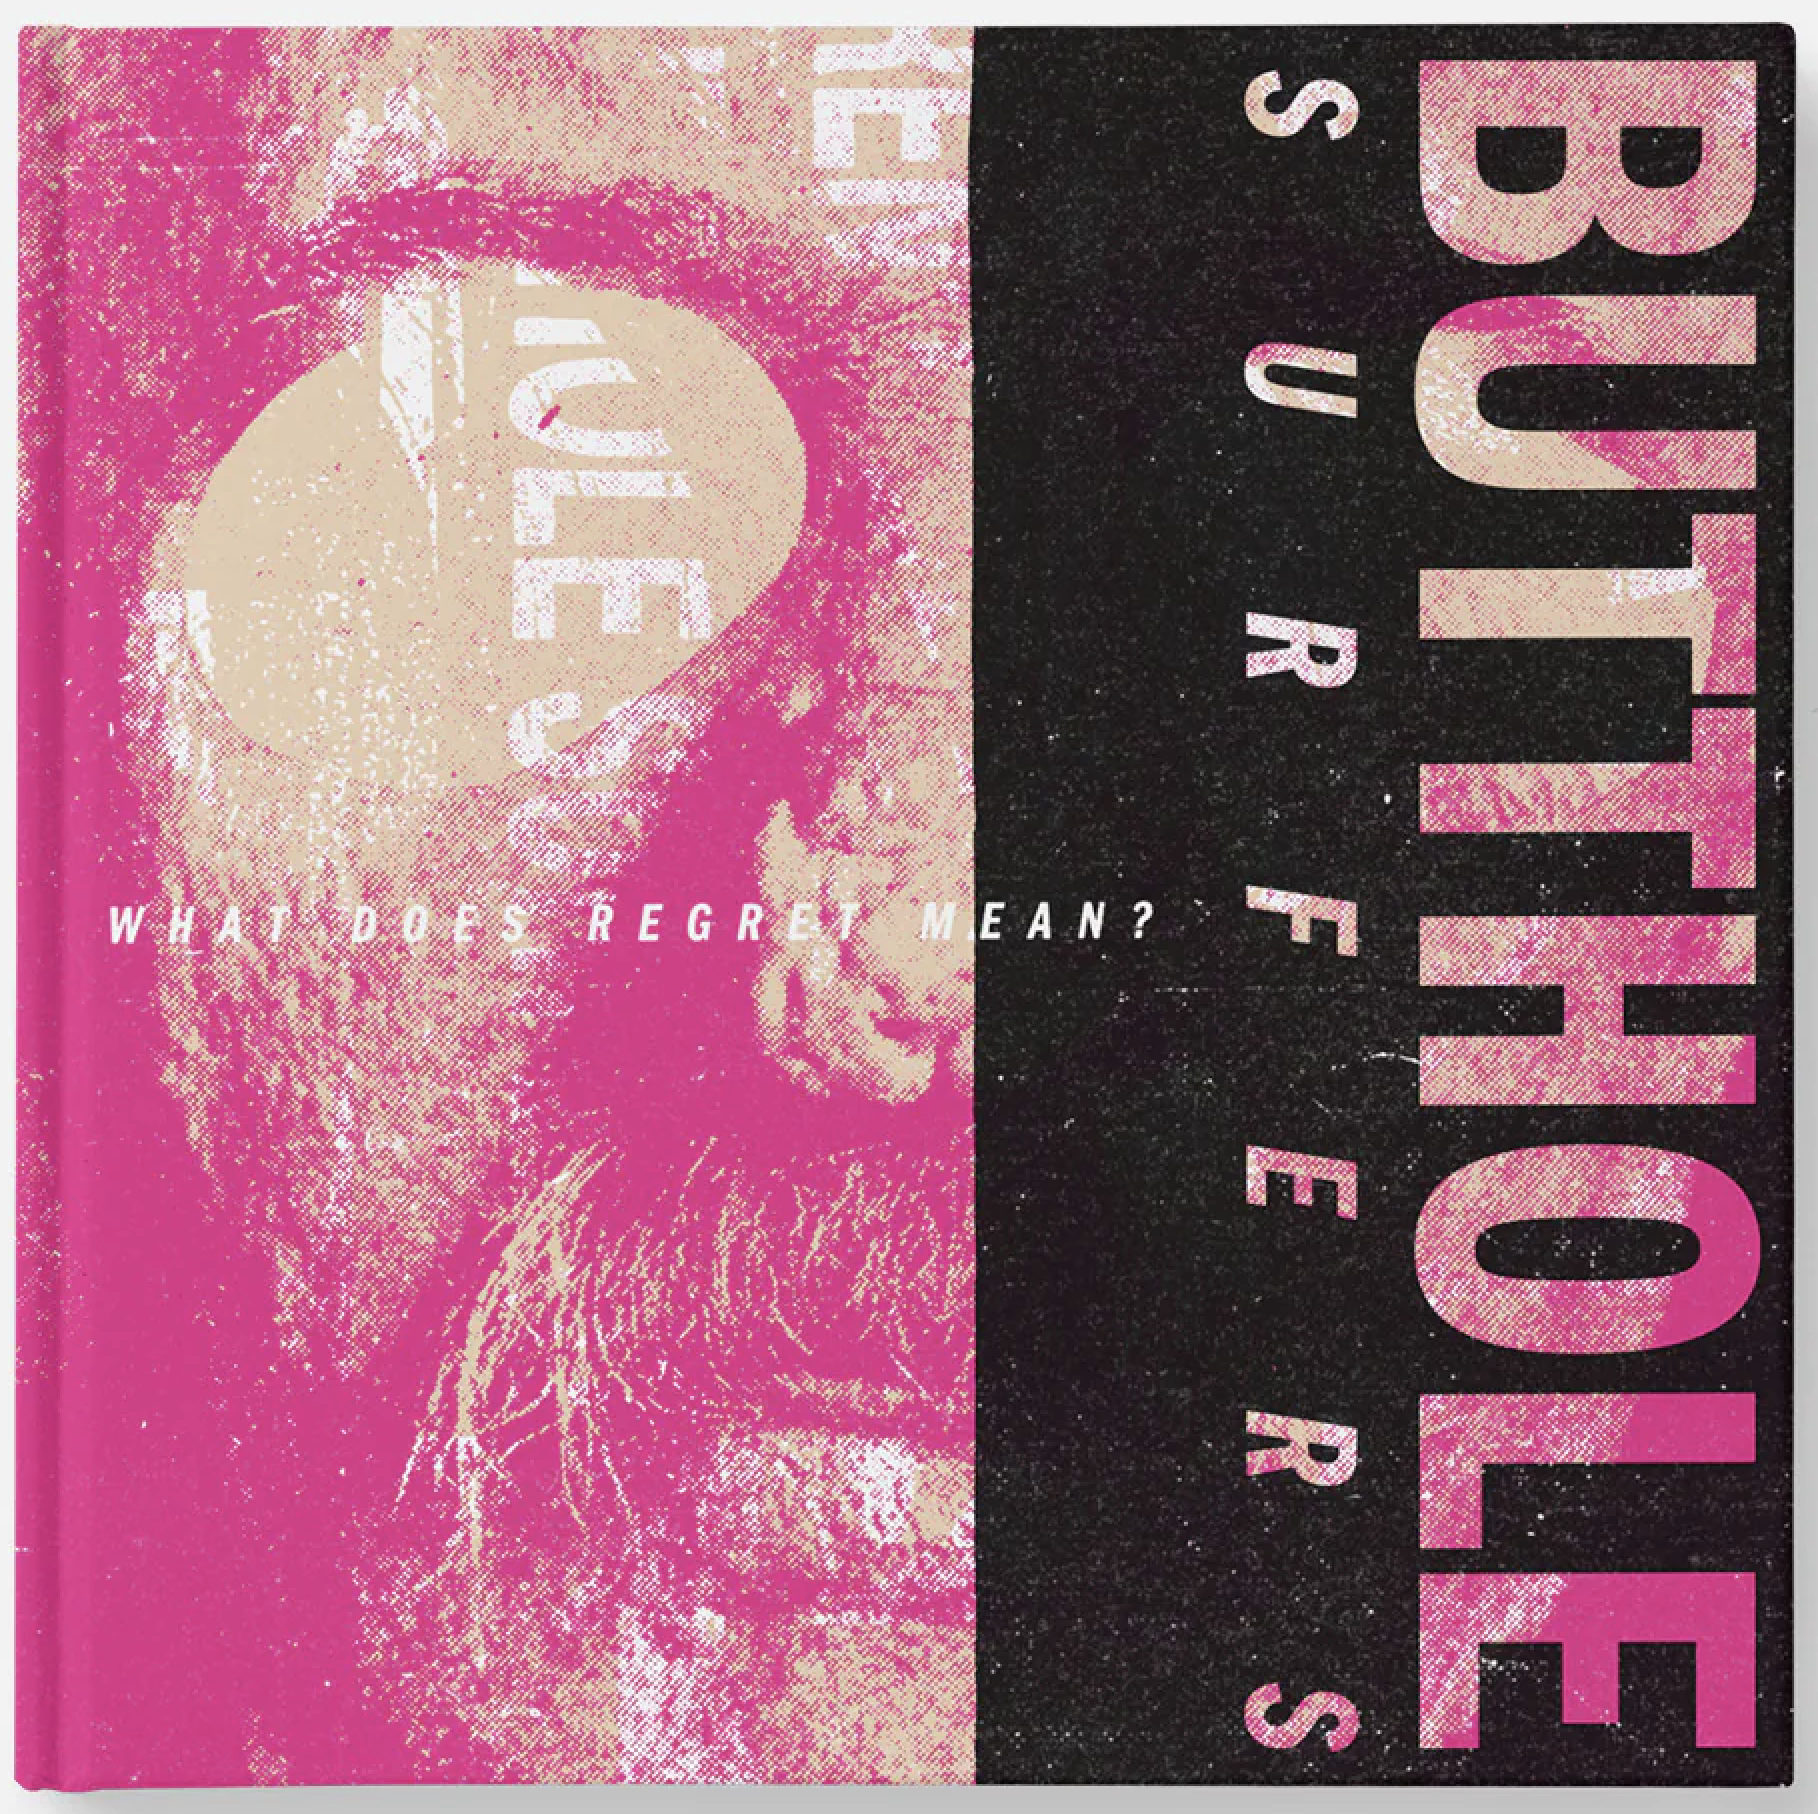 BUTTHOLE SURFERS (MELODIC VIRTUE)